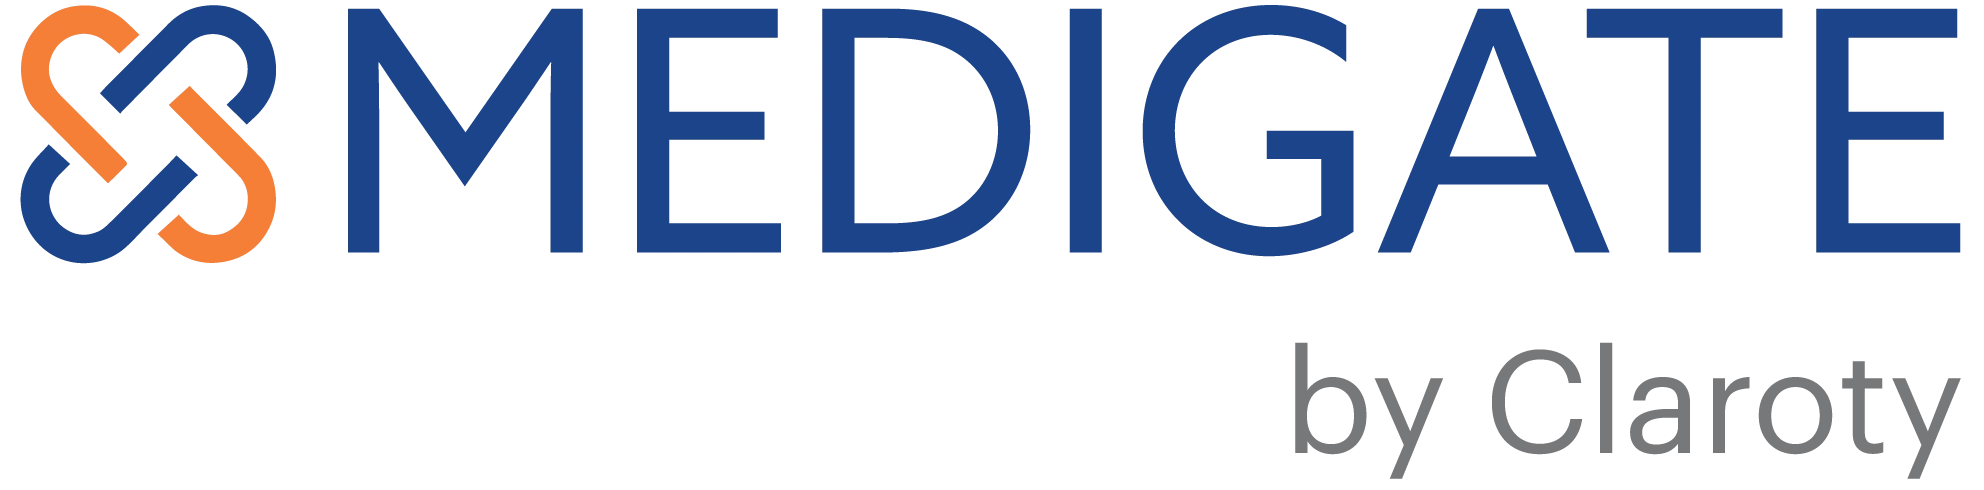 Medigate is a highly flexible solution that covers your entire healthcare cybersecurity journey